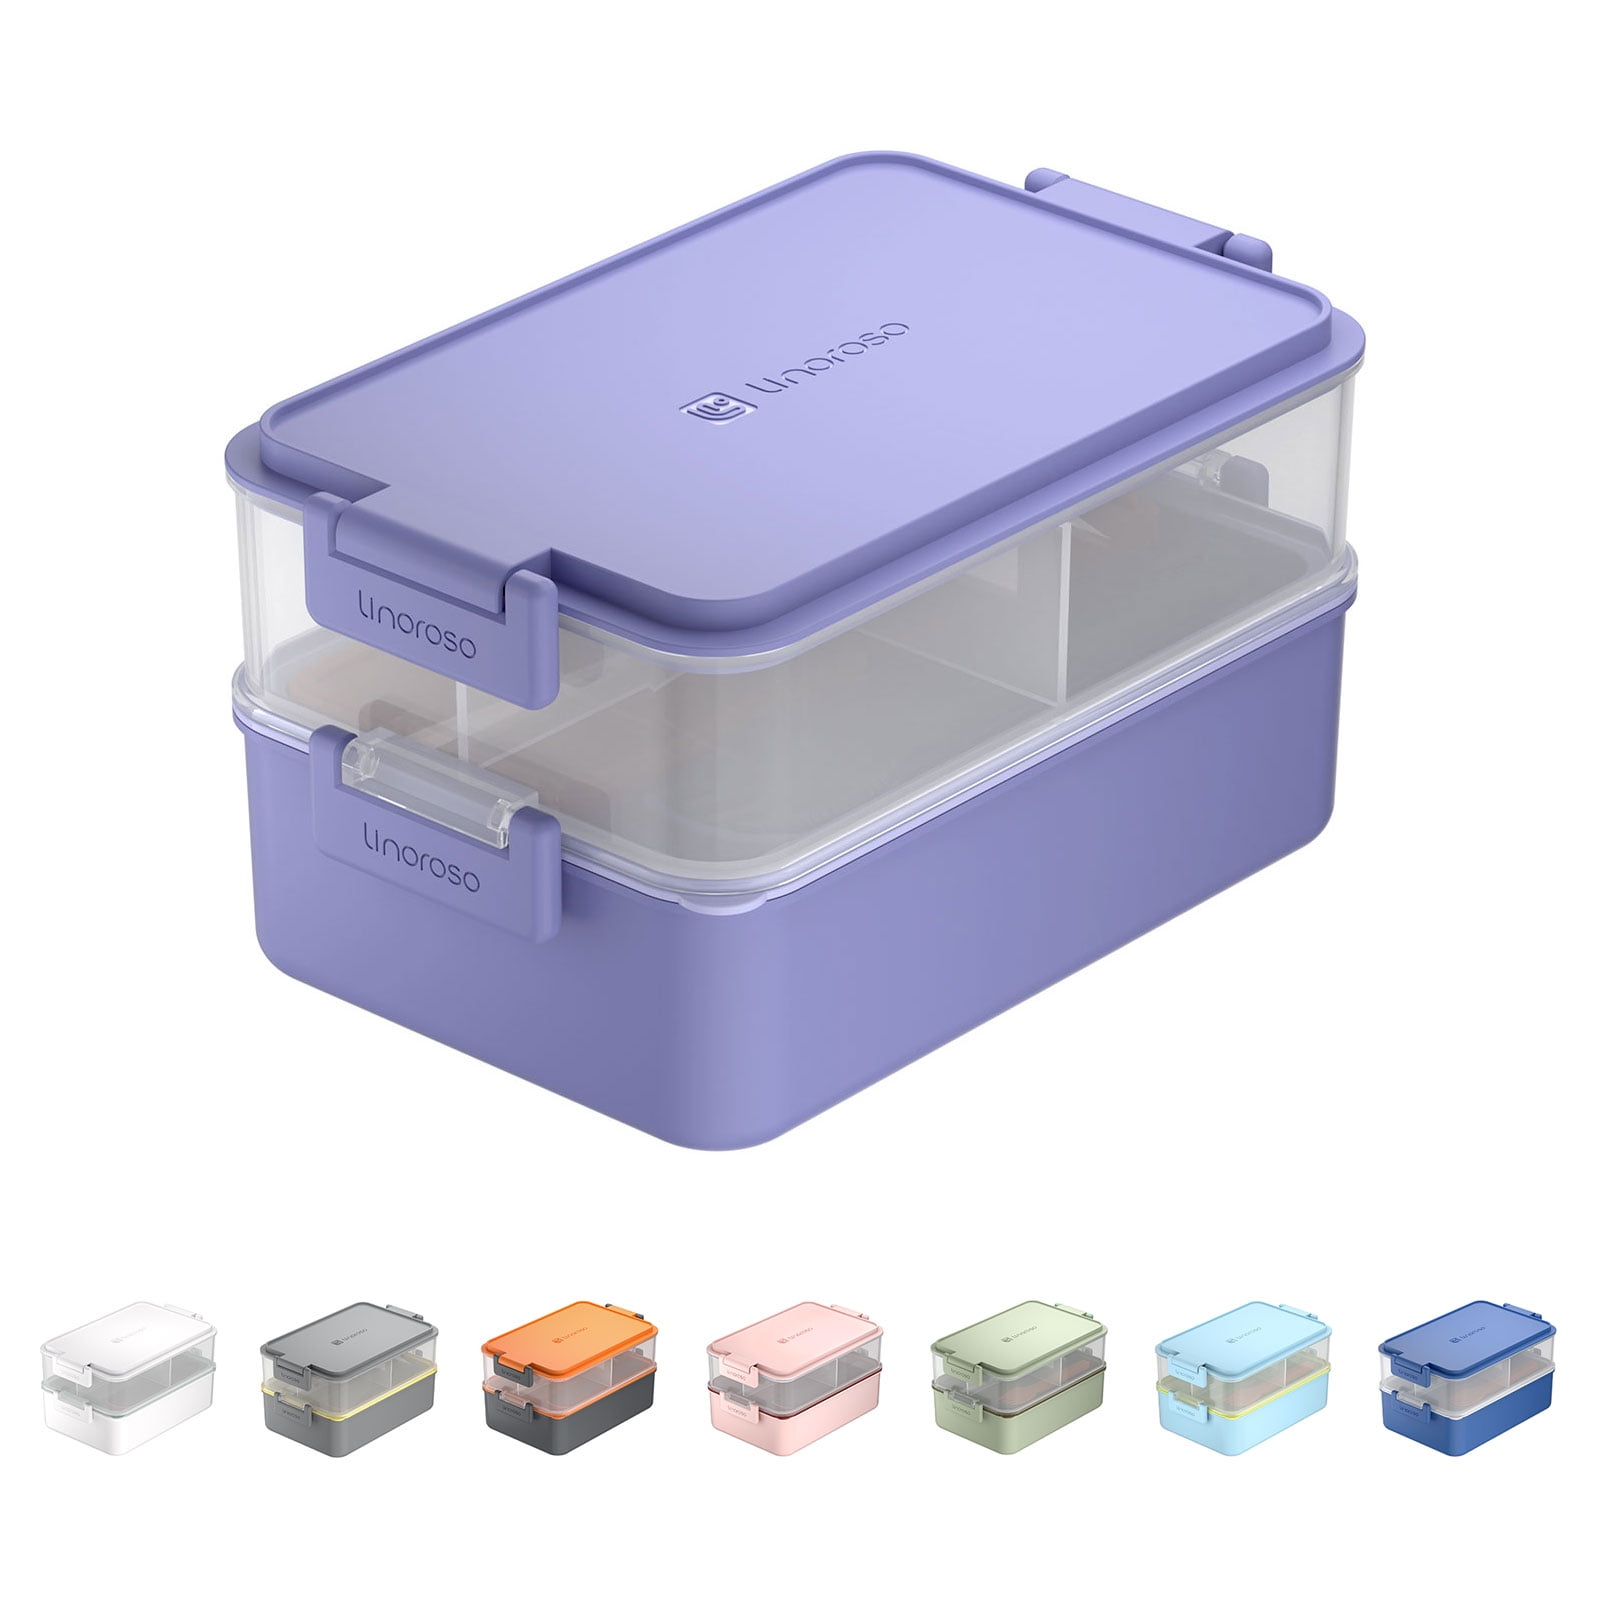 Bentgo Classic (Purple) - All-in-One Stackable Lunch Box Solution